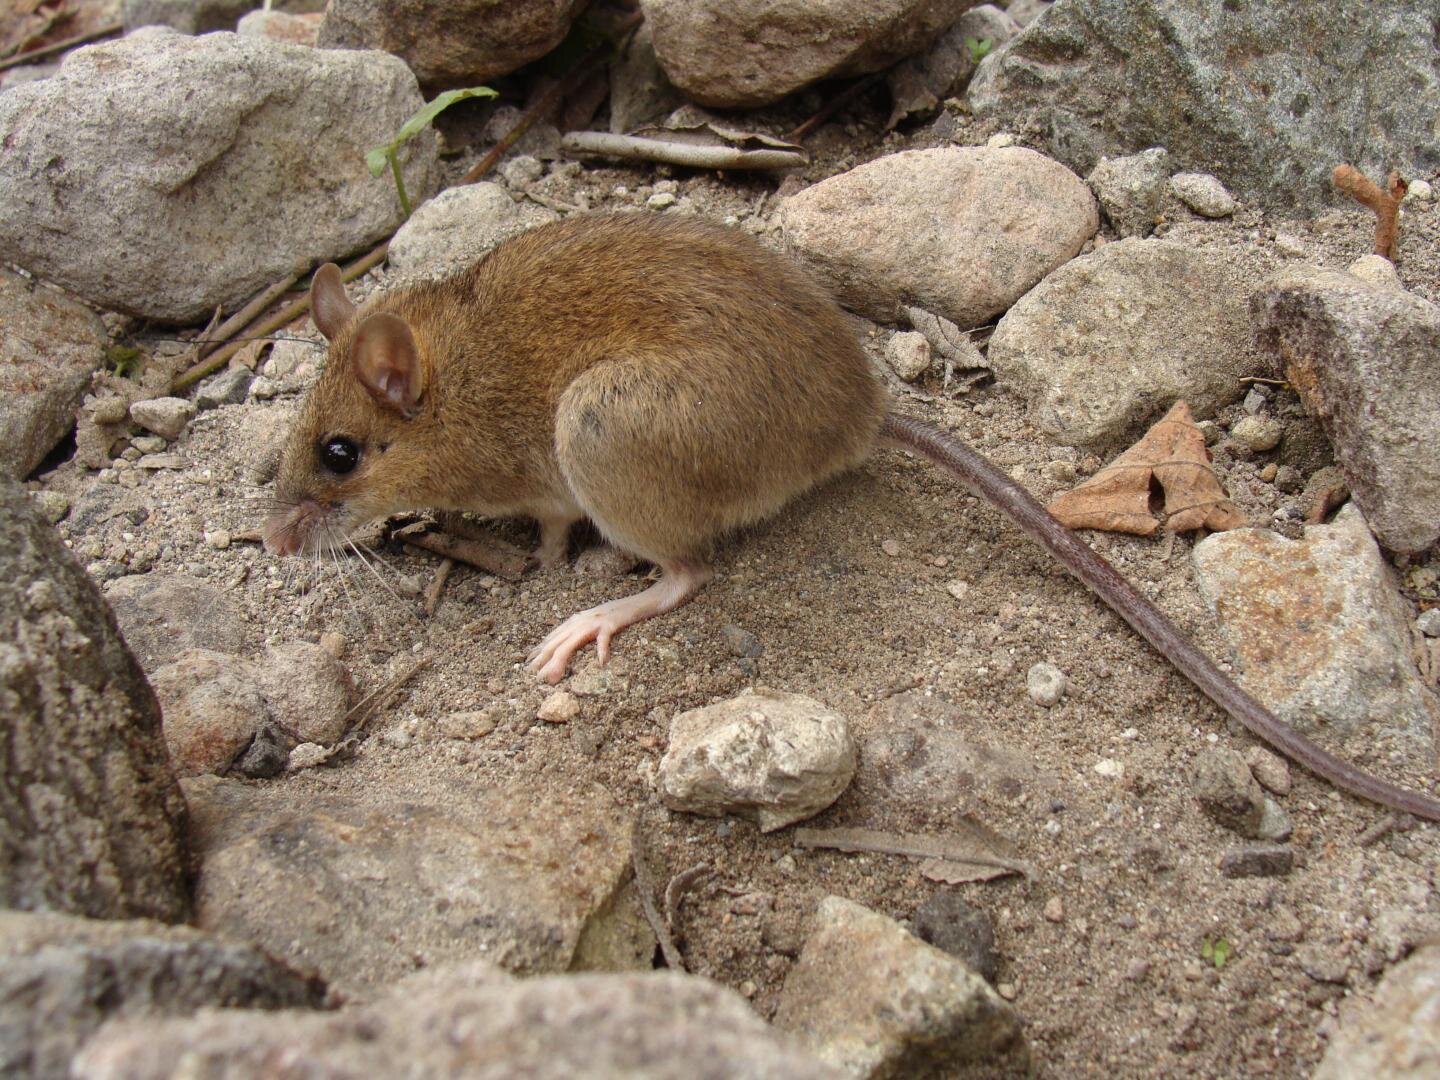 Rediscovery of the ‘extinct’ volcanic mouse Pinatubo